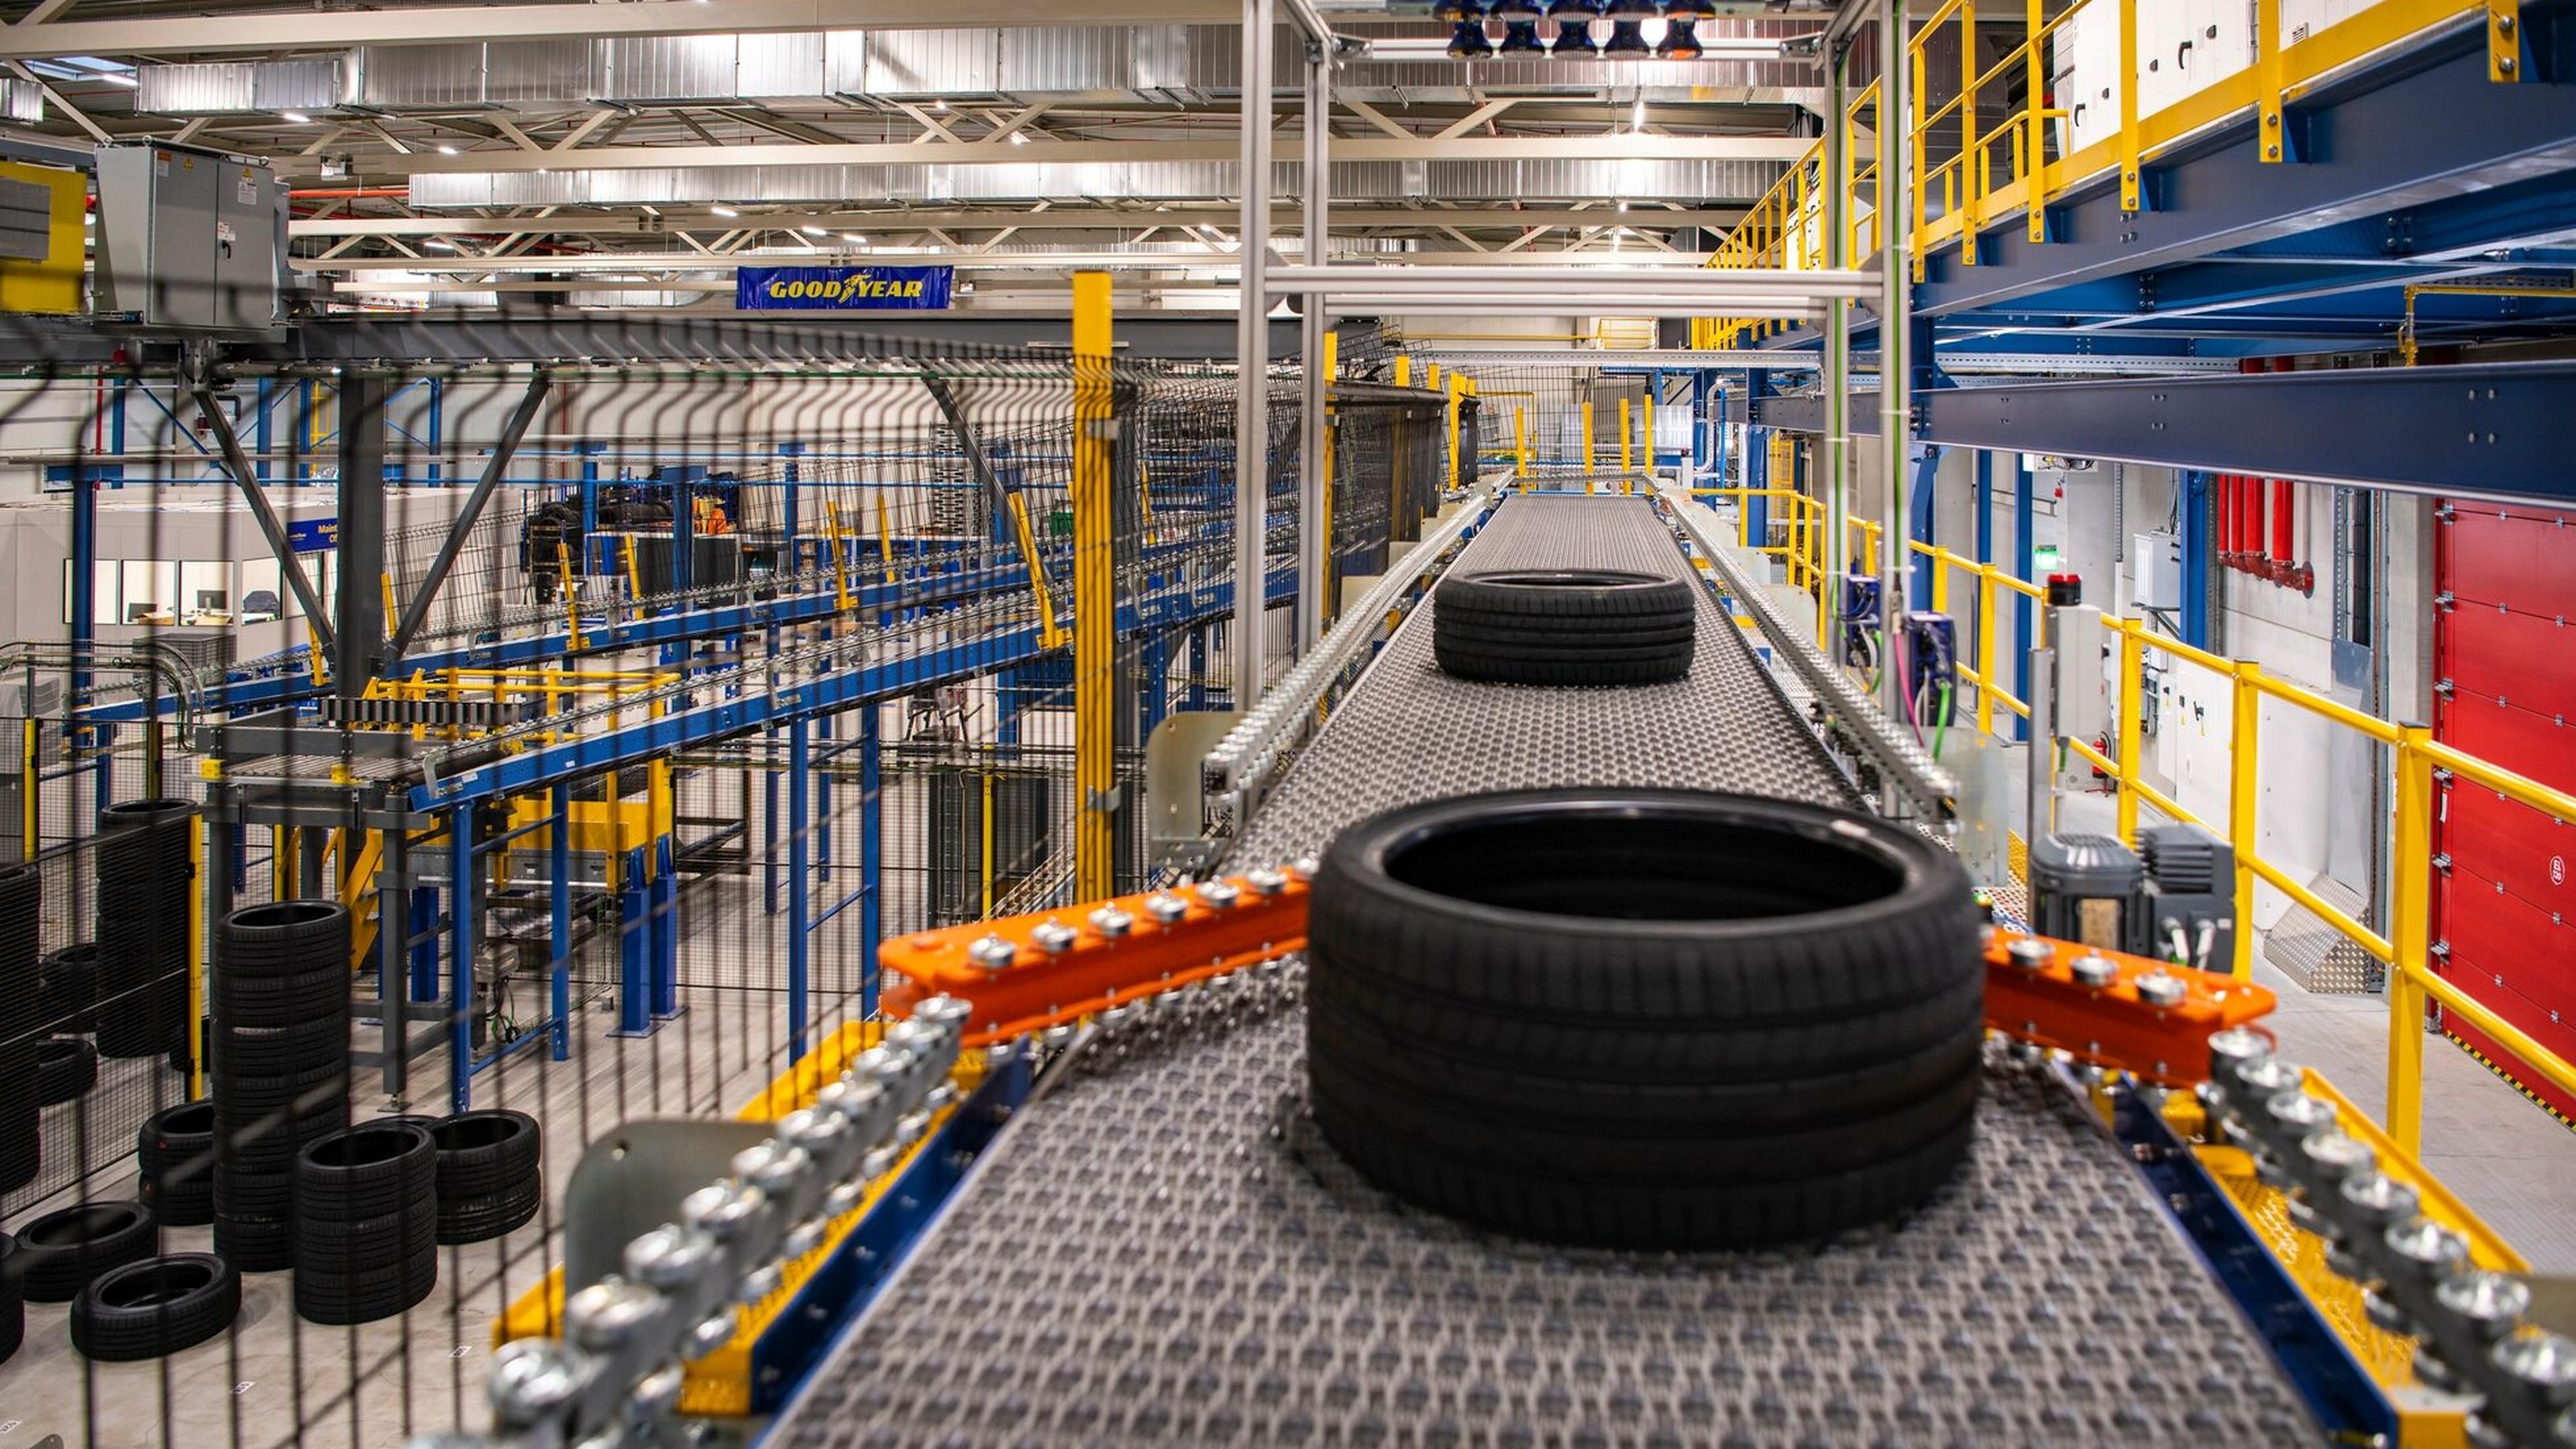 Goodyear’s tyres, produced in Colmar-Berg, are at the centre of the allegations